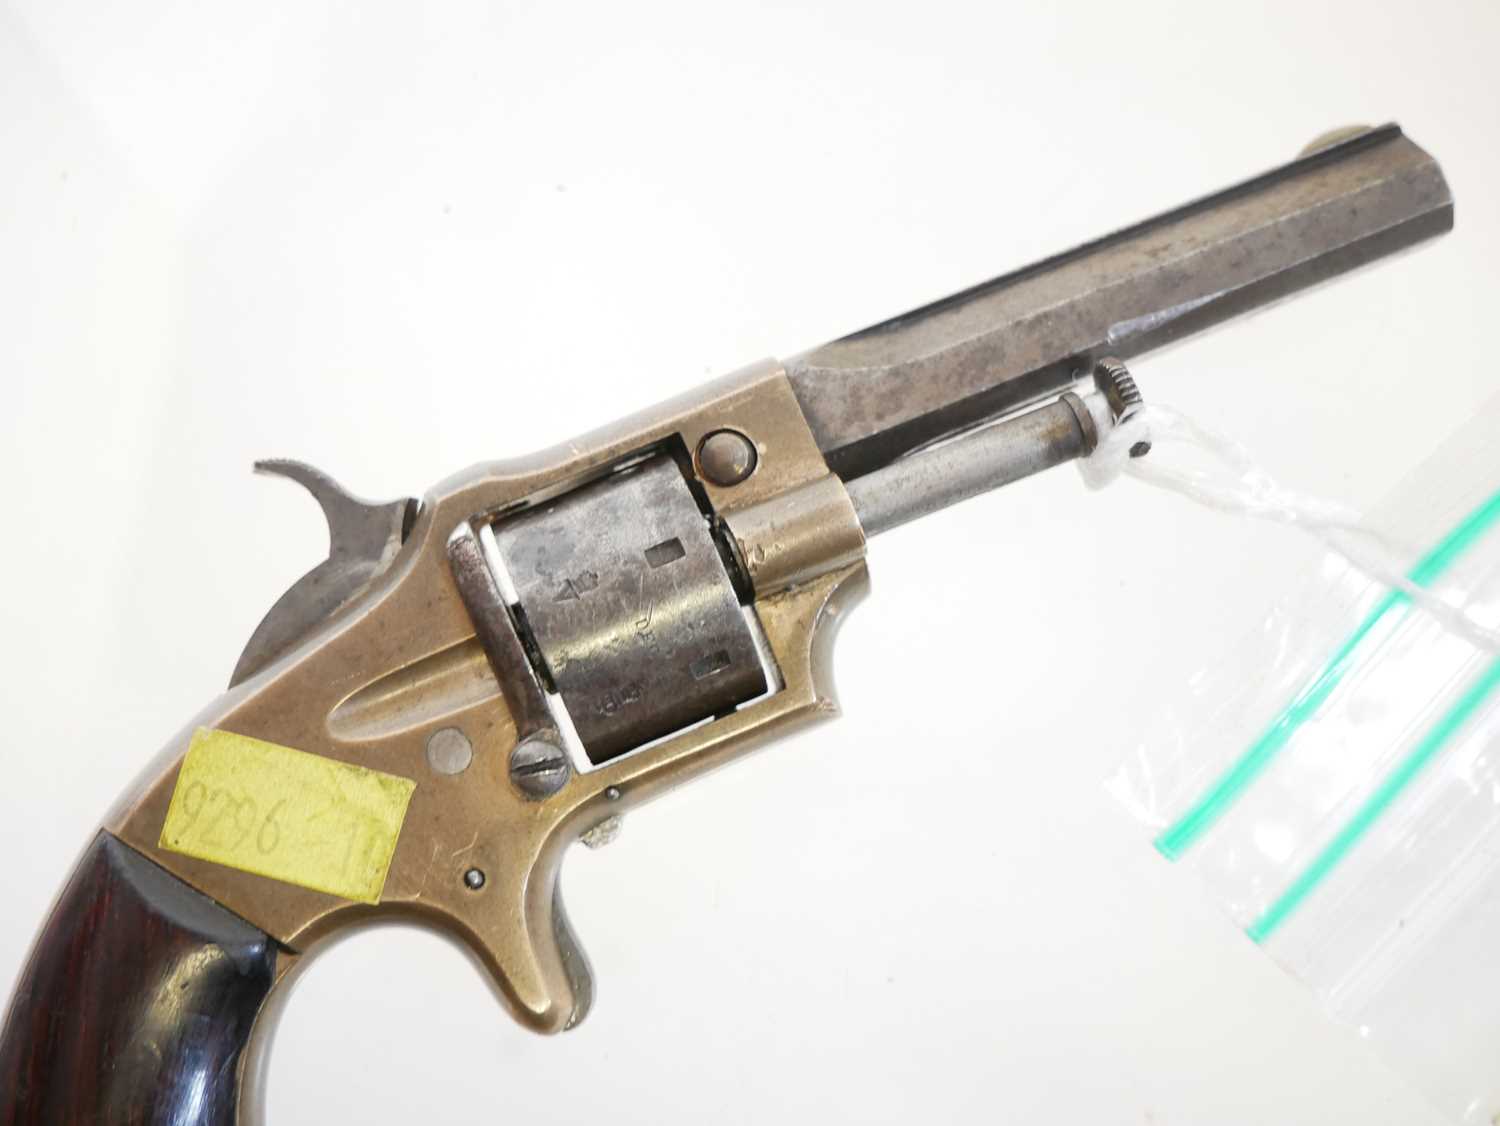 Deactivated Smith and Wesson .22 rimfire revolver - Image 2 of 7